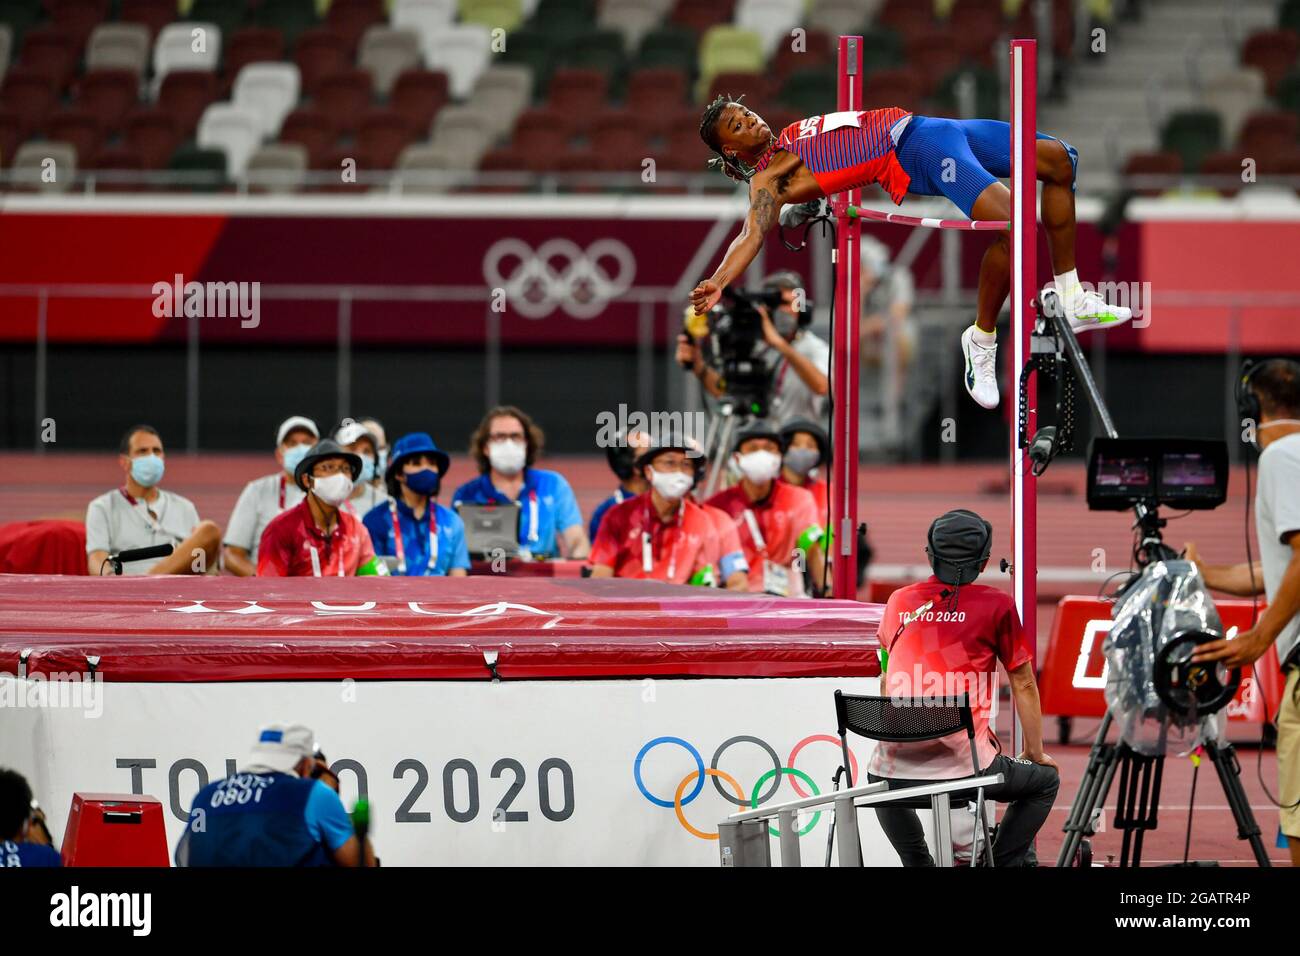 TOKYO, JAPAN - AUGUST 1: Juvaughn Harrison of United States of America competing on Men's High Jump Final during the Tokyo 2020 Olympic Games at the Olympic Stadium on August 1, 2021 in Tokyo, Japan (Photo by Andy Astfalck/Orange Pictures) Stock Photo